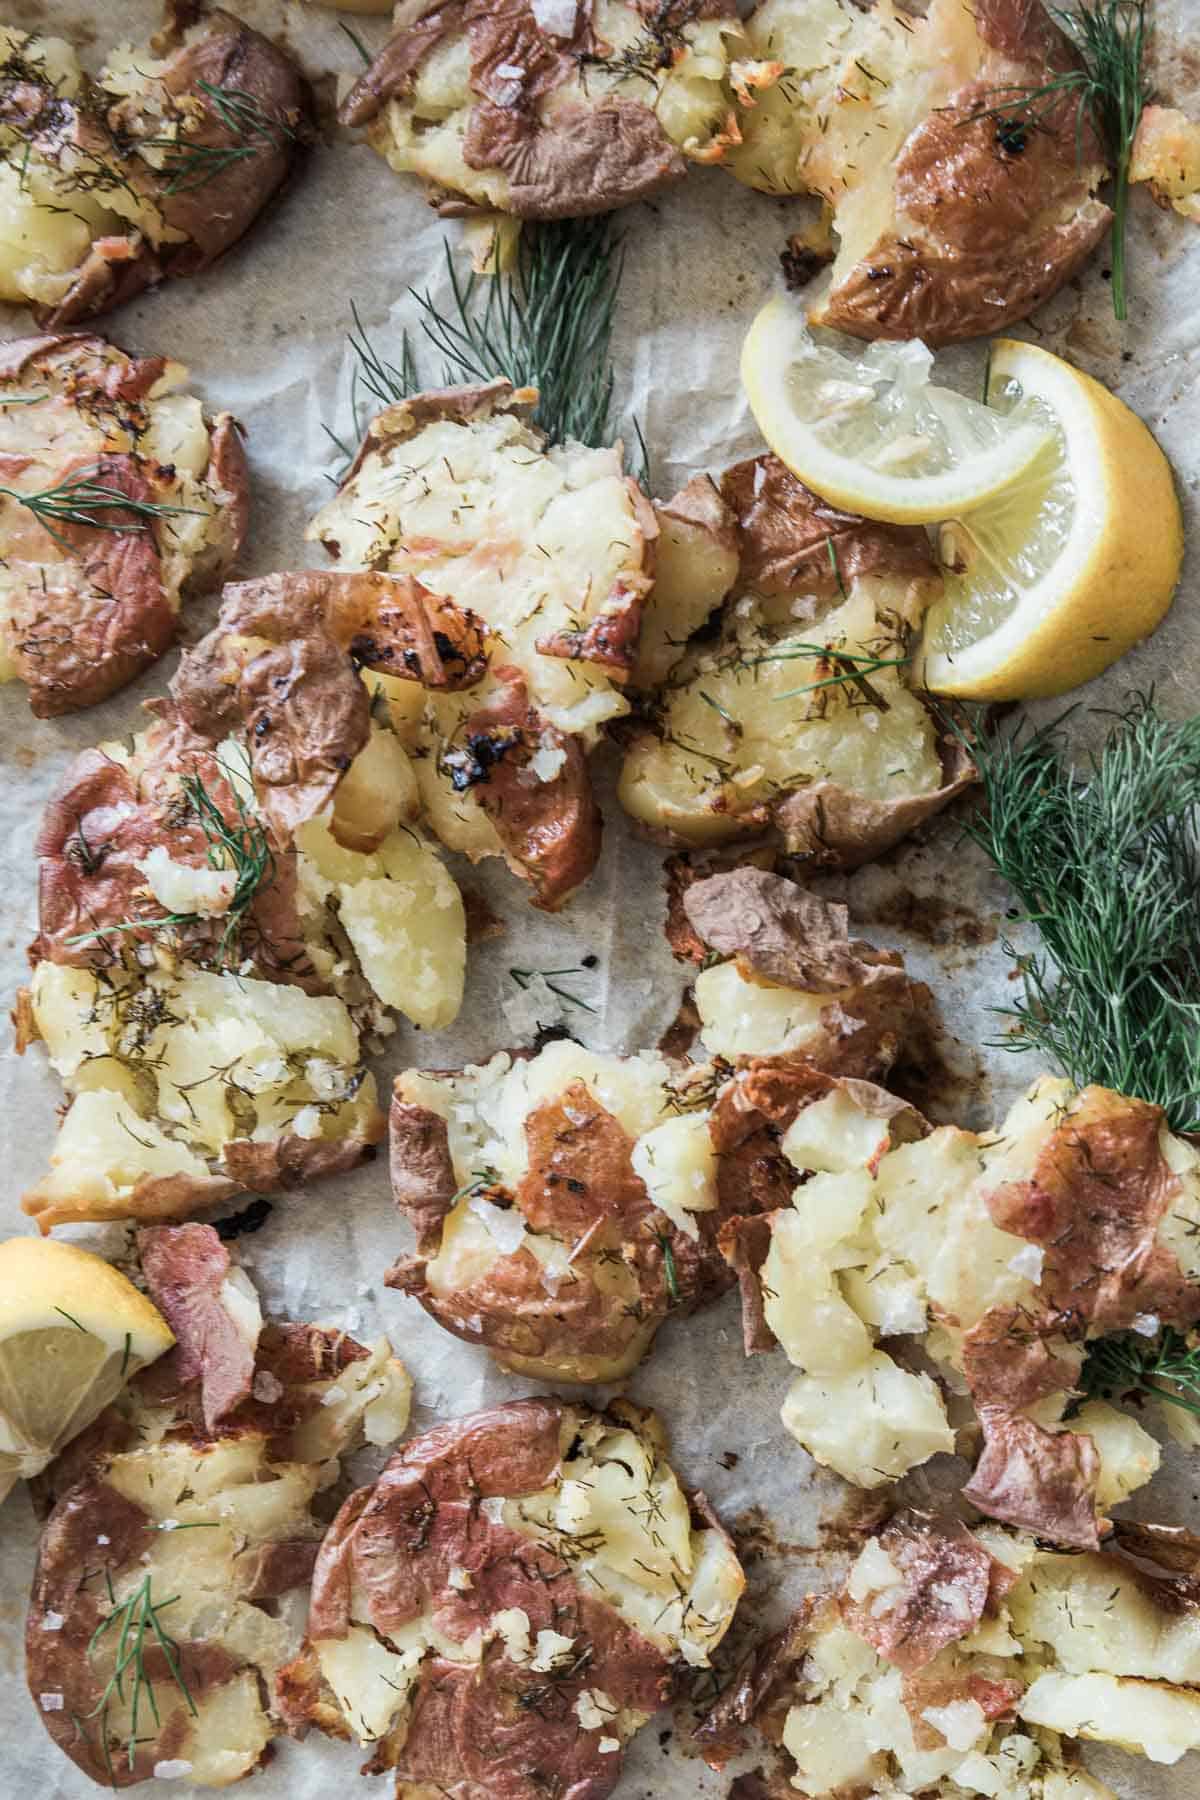 Smashed red potatoes on parchment paper. They are garnished with lemon and dill.